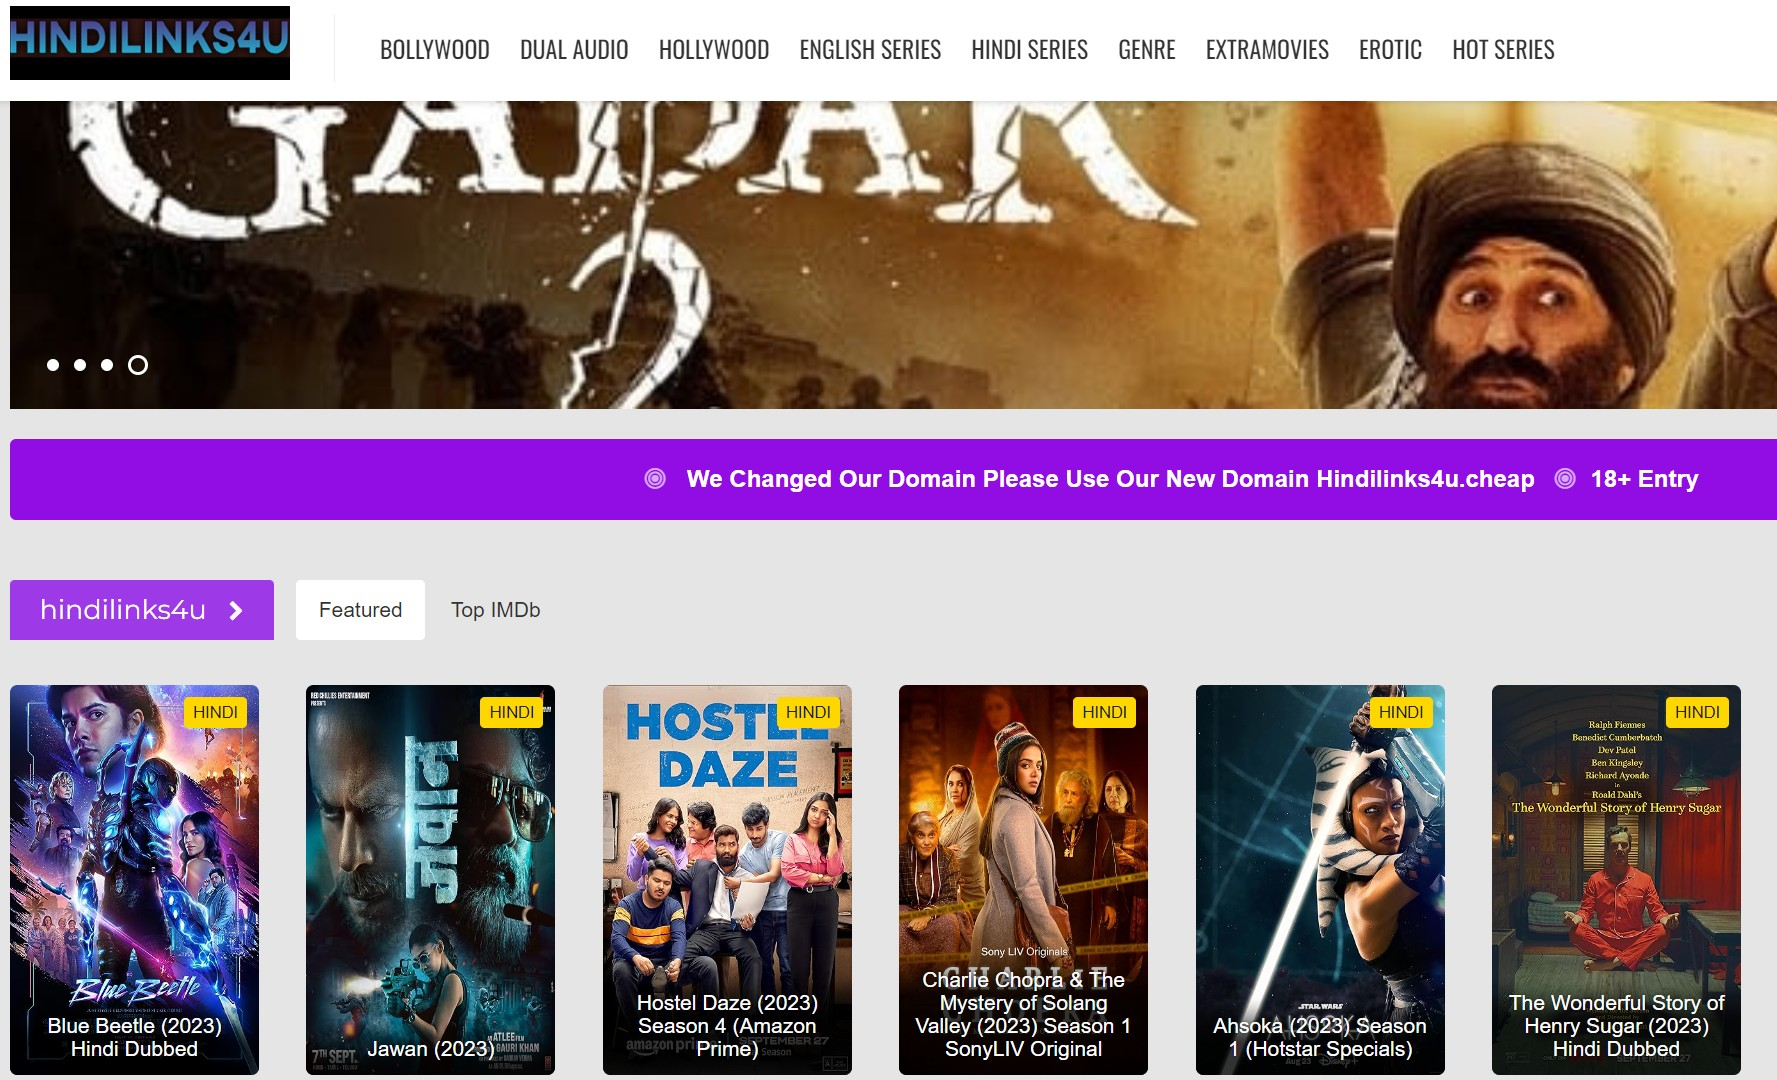 Watch Hindi Movies Online from the Hindilinks4u site